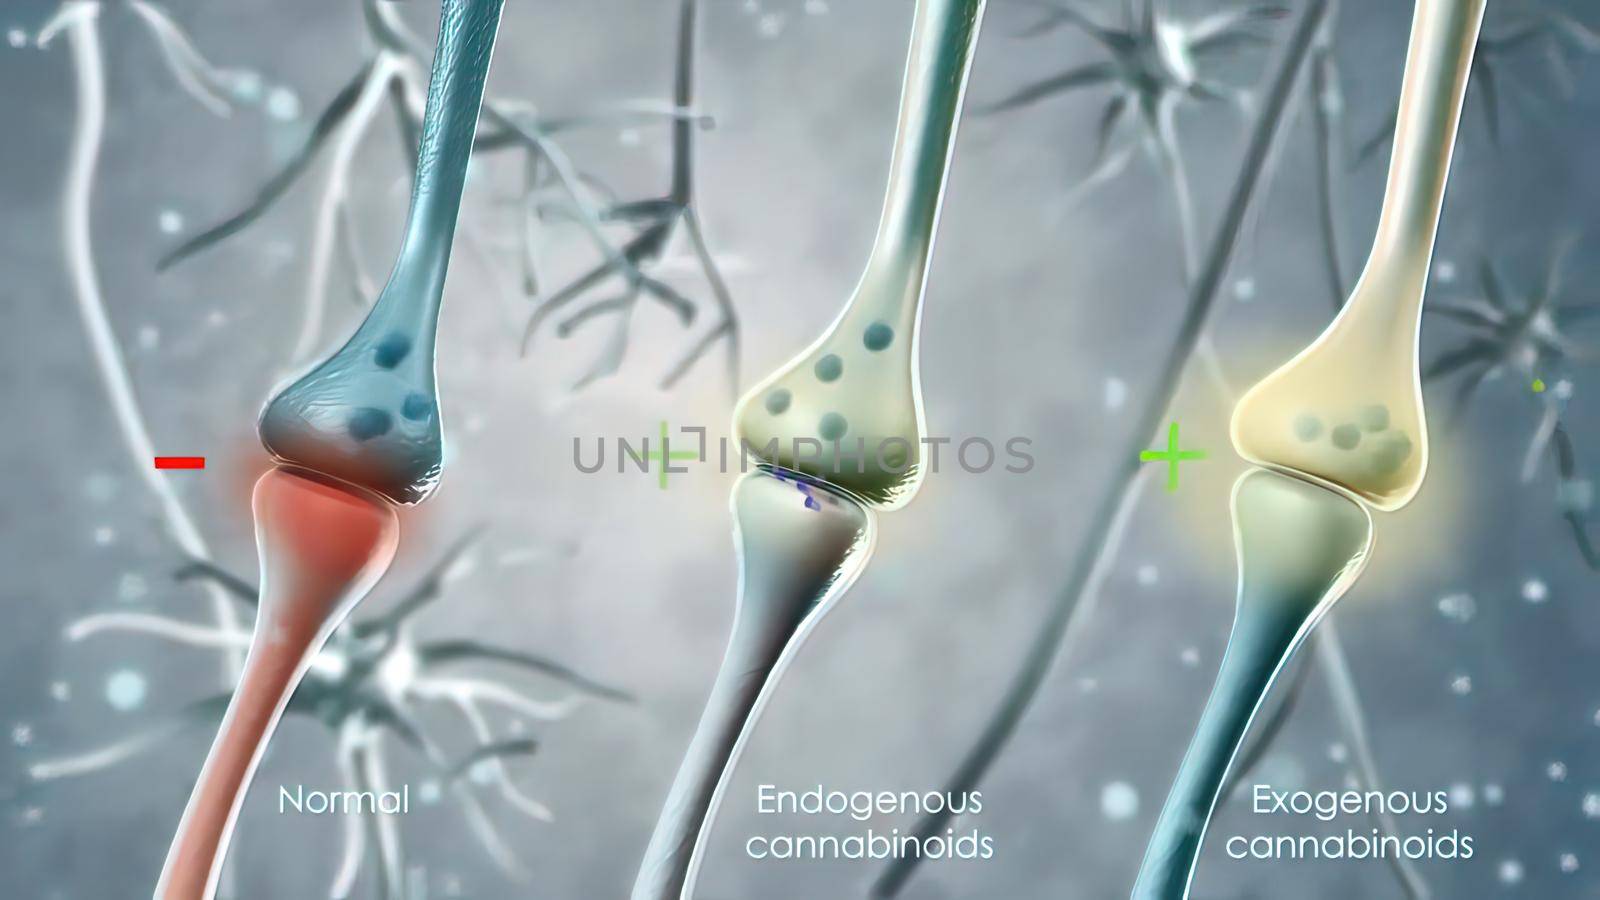 The network used by the cell receptors to communicate with the cannabidiol is called the endocannabinoid system. 3D illustration